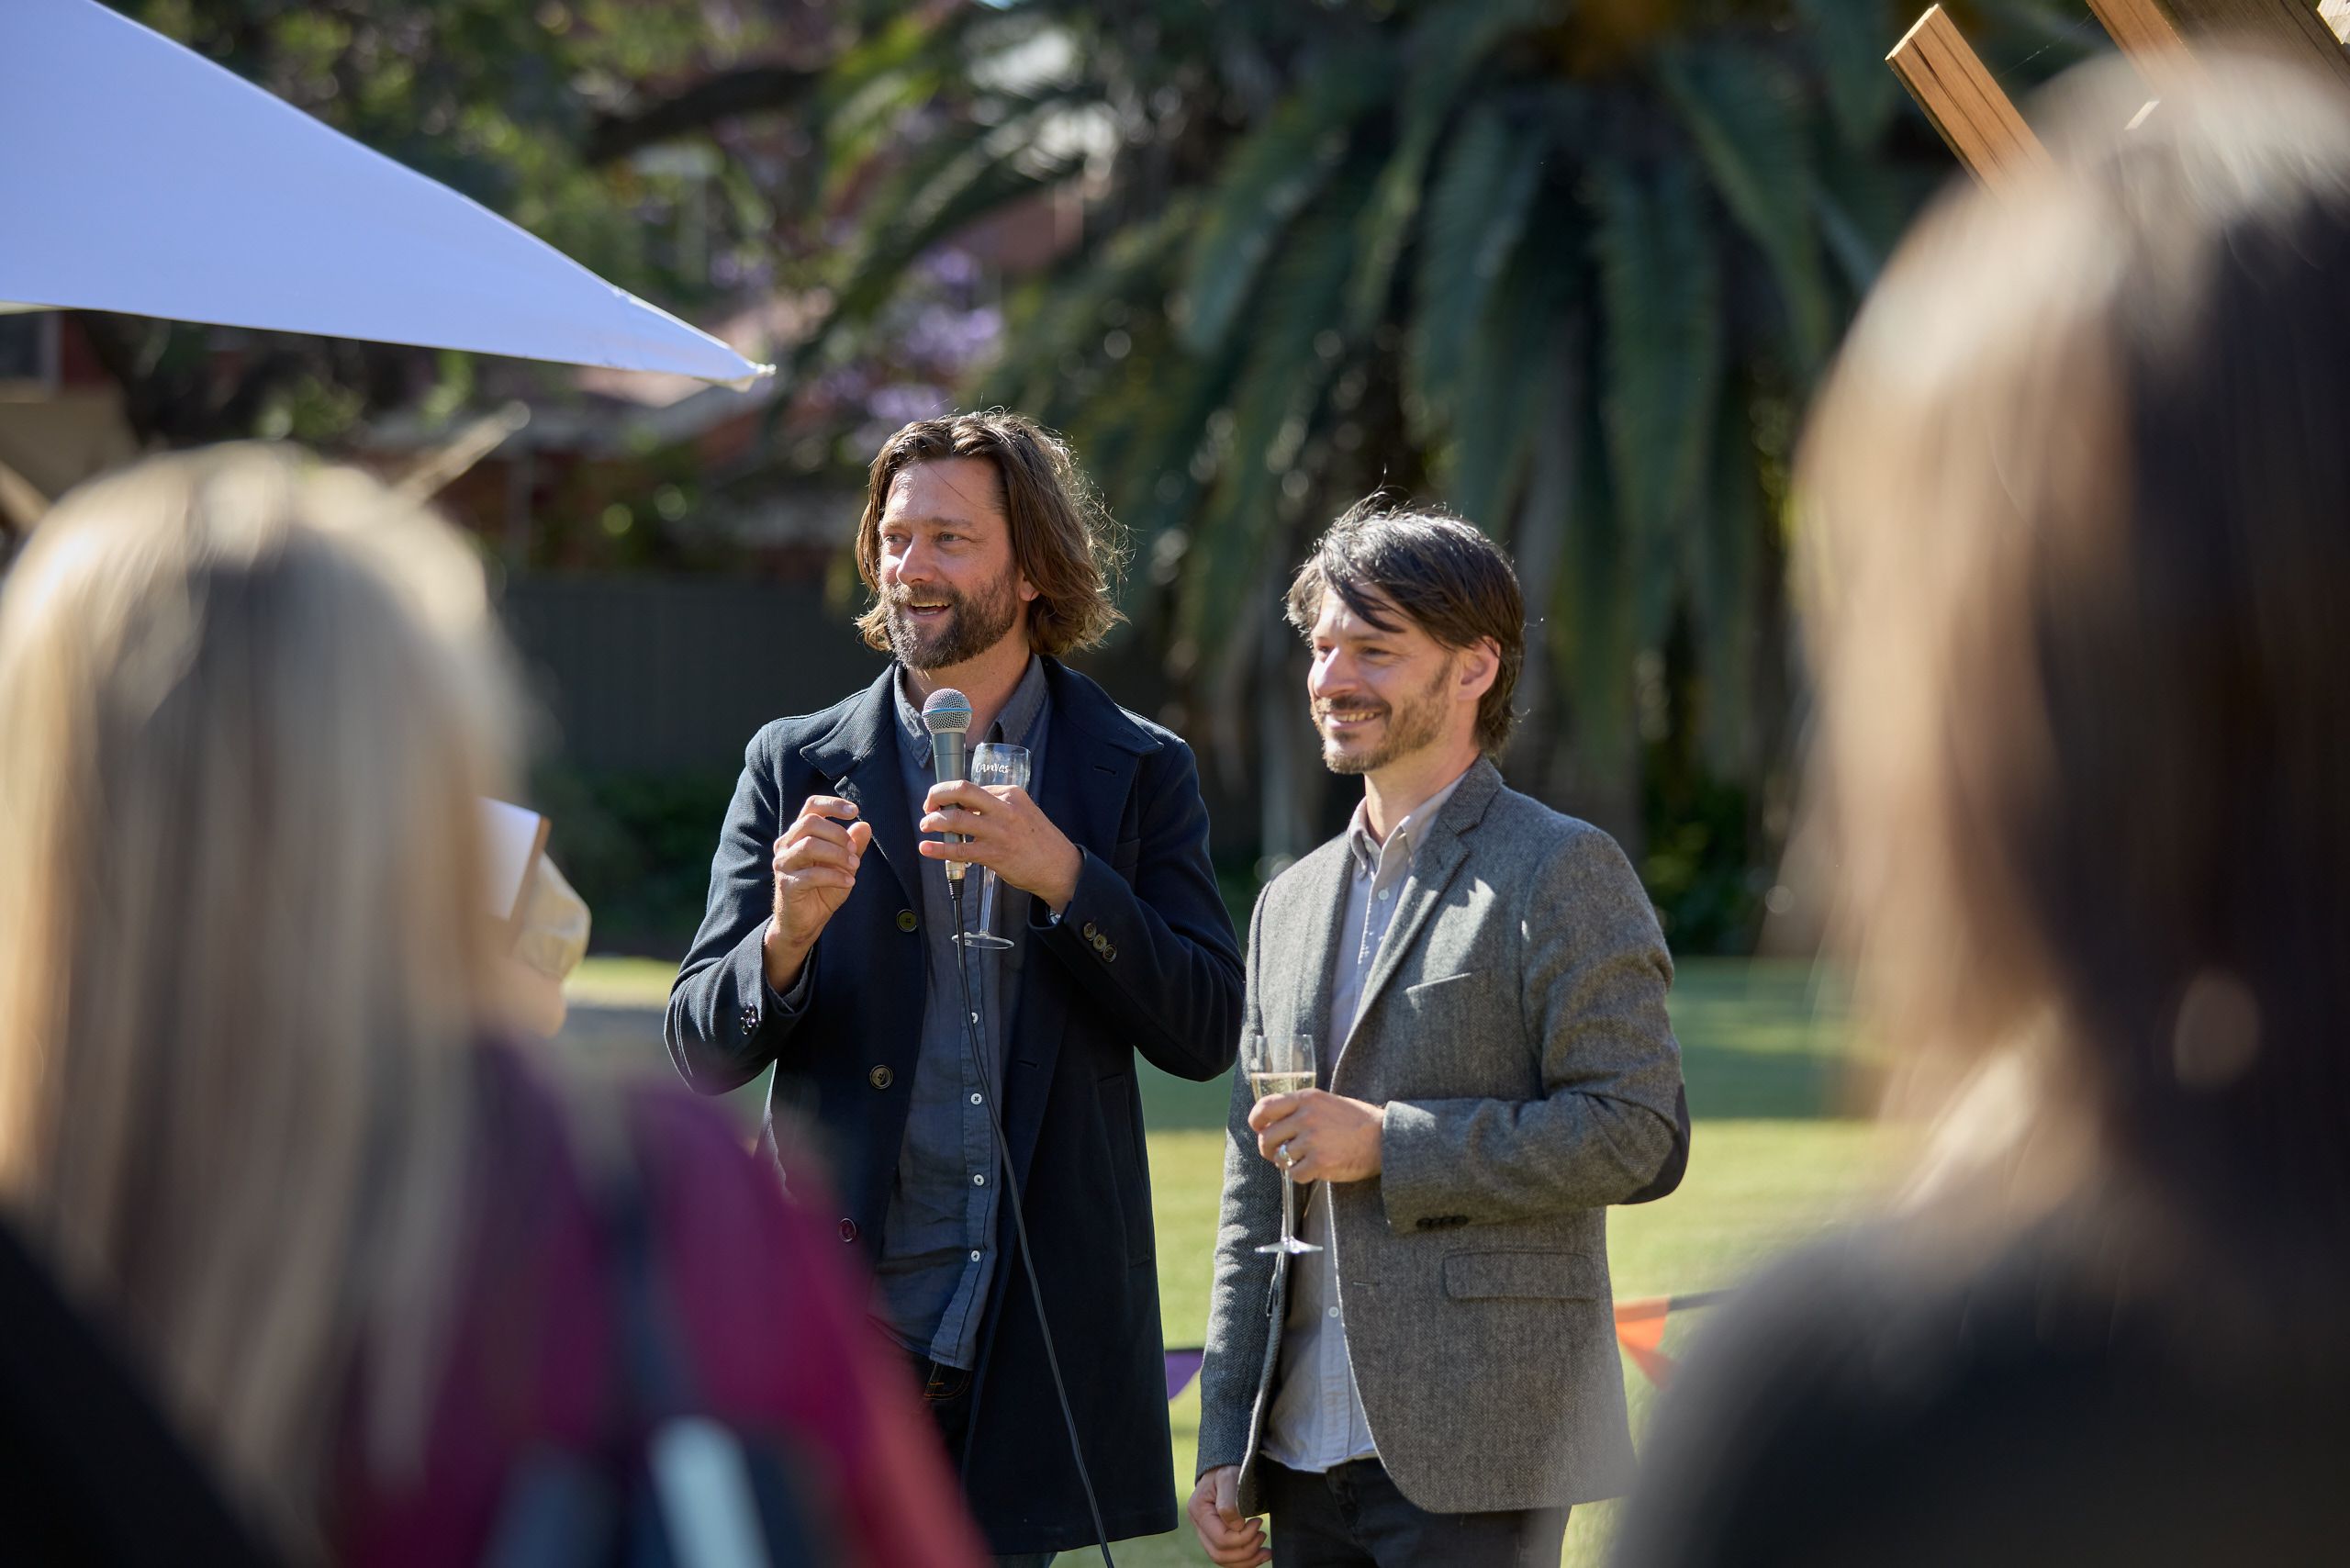 To men stand holding wine glasses in a park with a crowd gathered around, the one on the left speaks into a microphone 